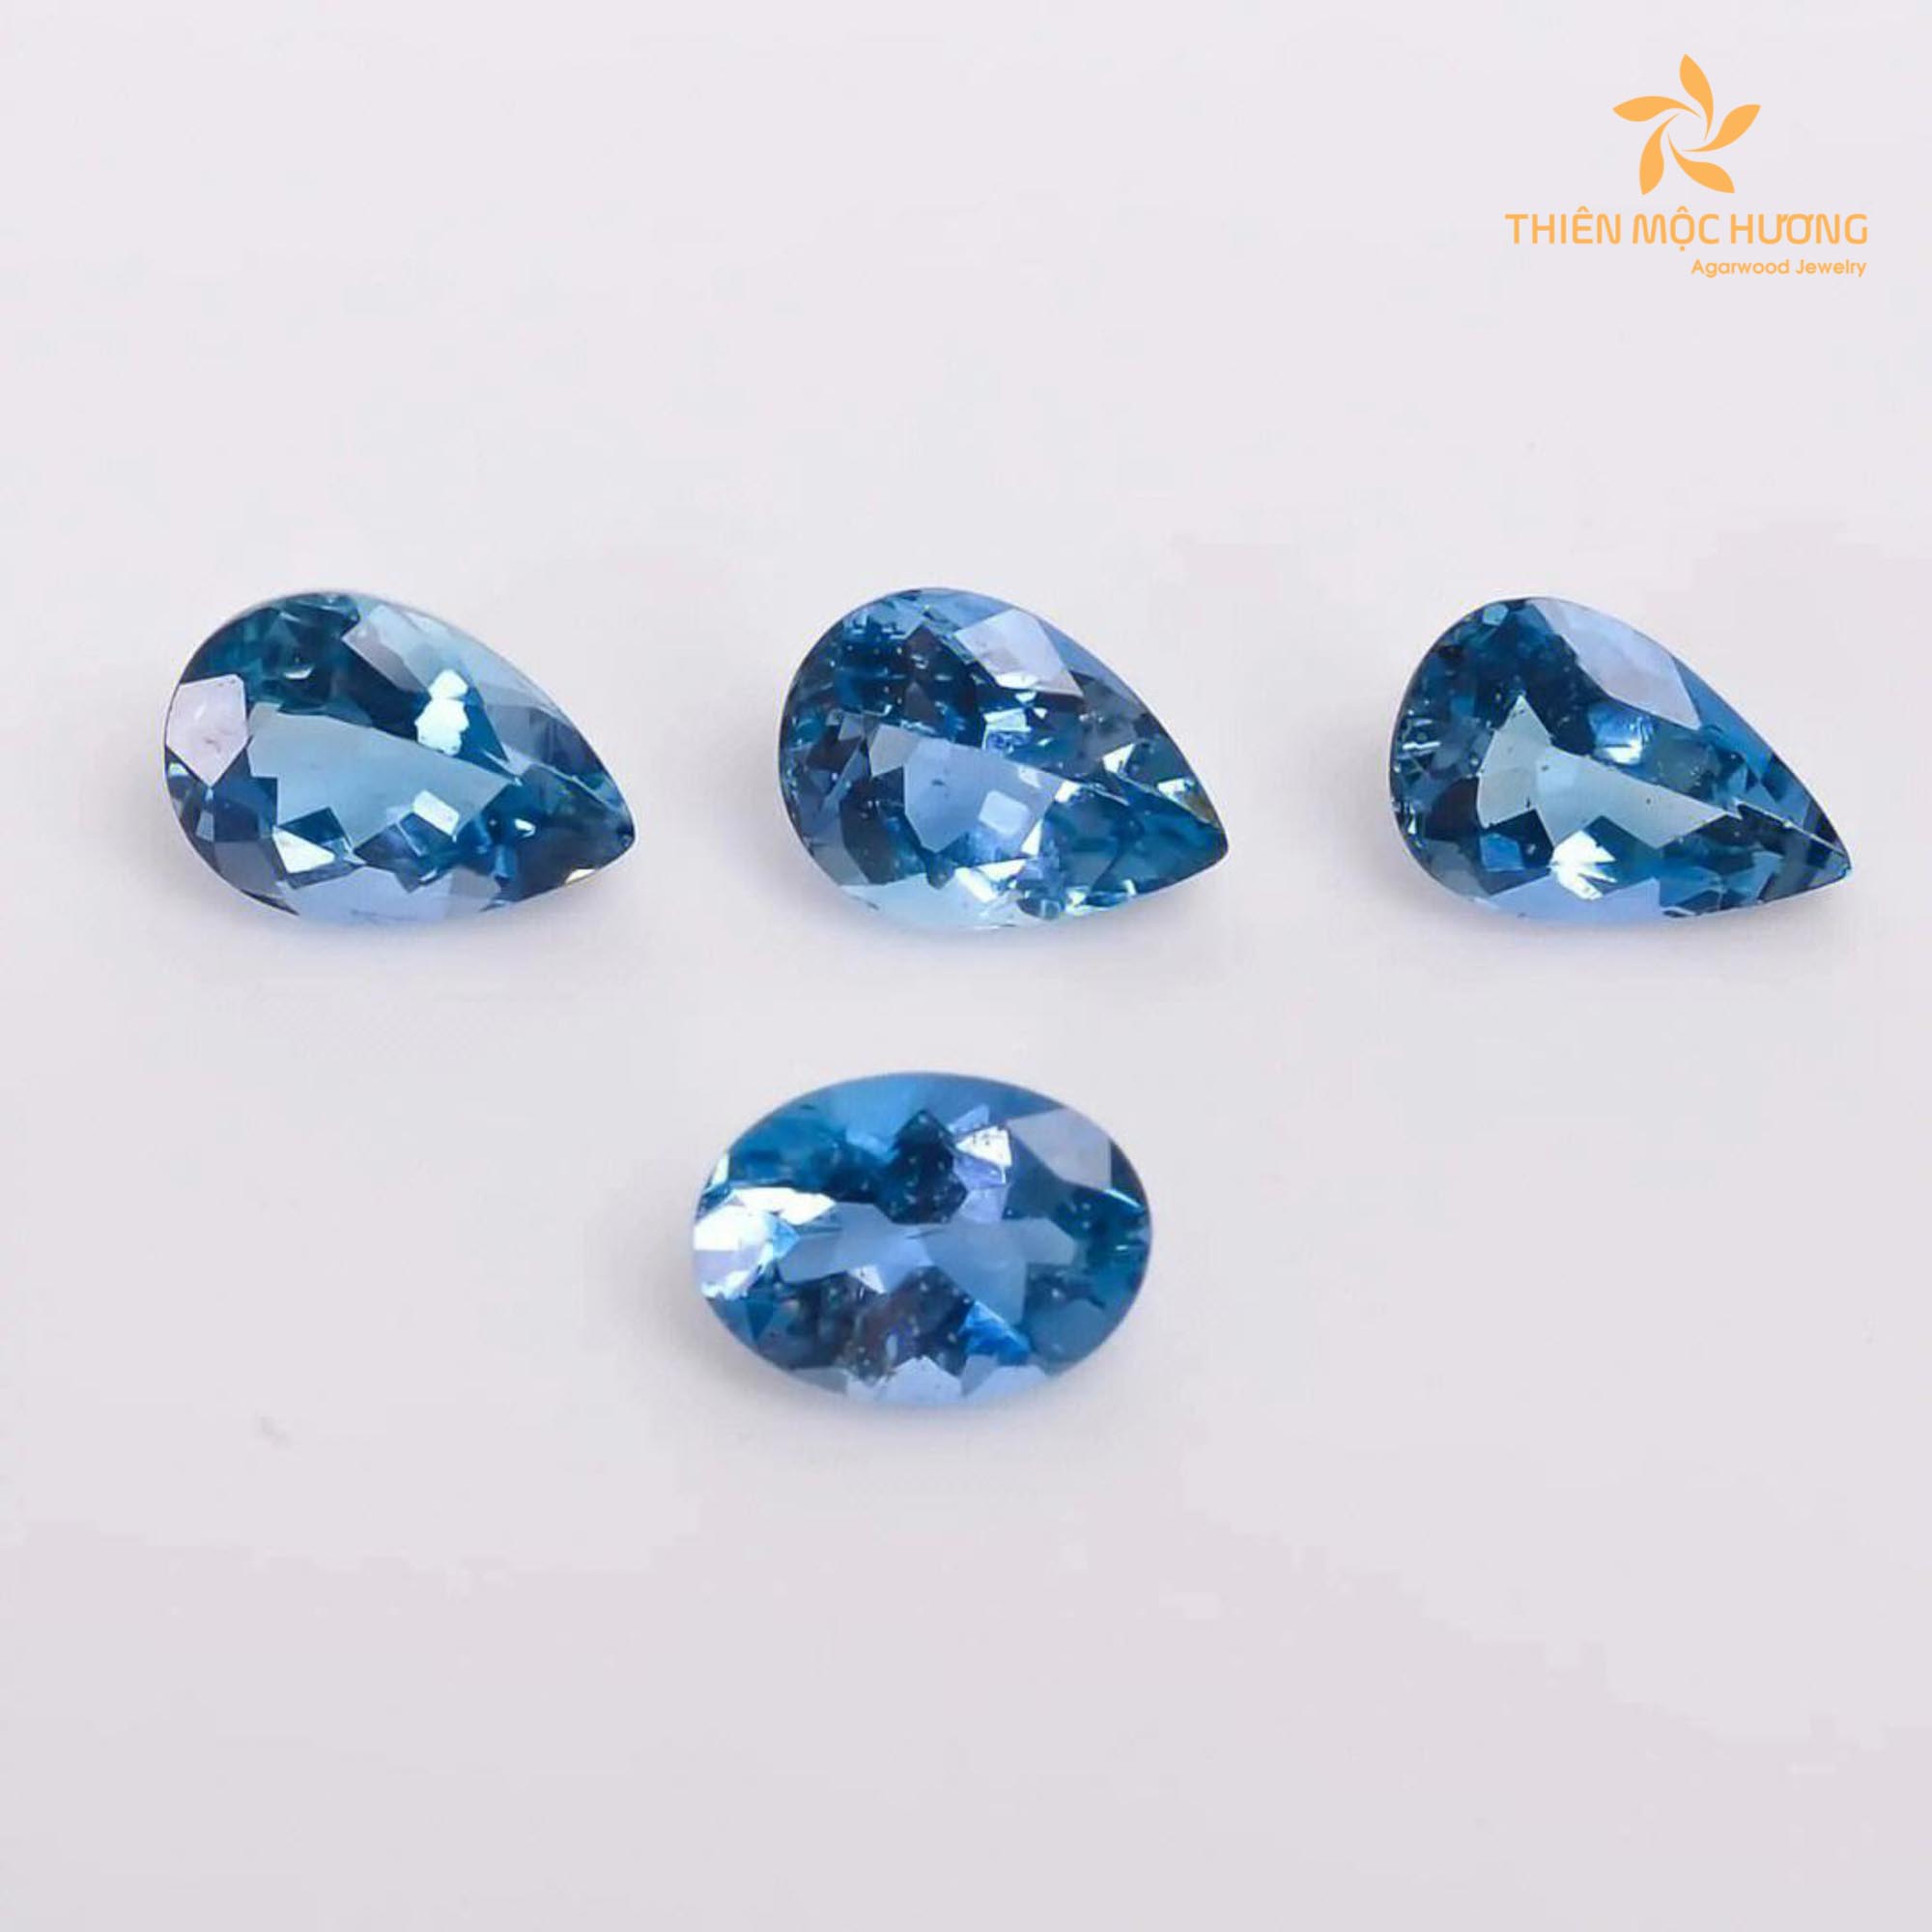 Aquamarine has held immense cultural and historical significance